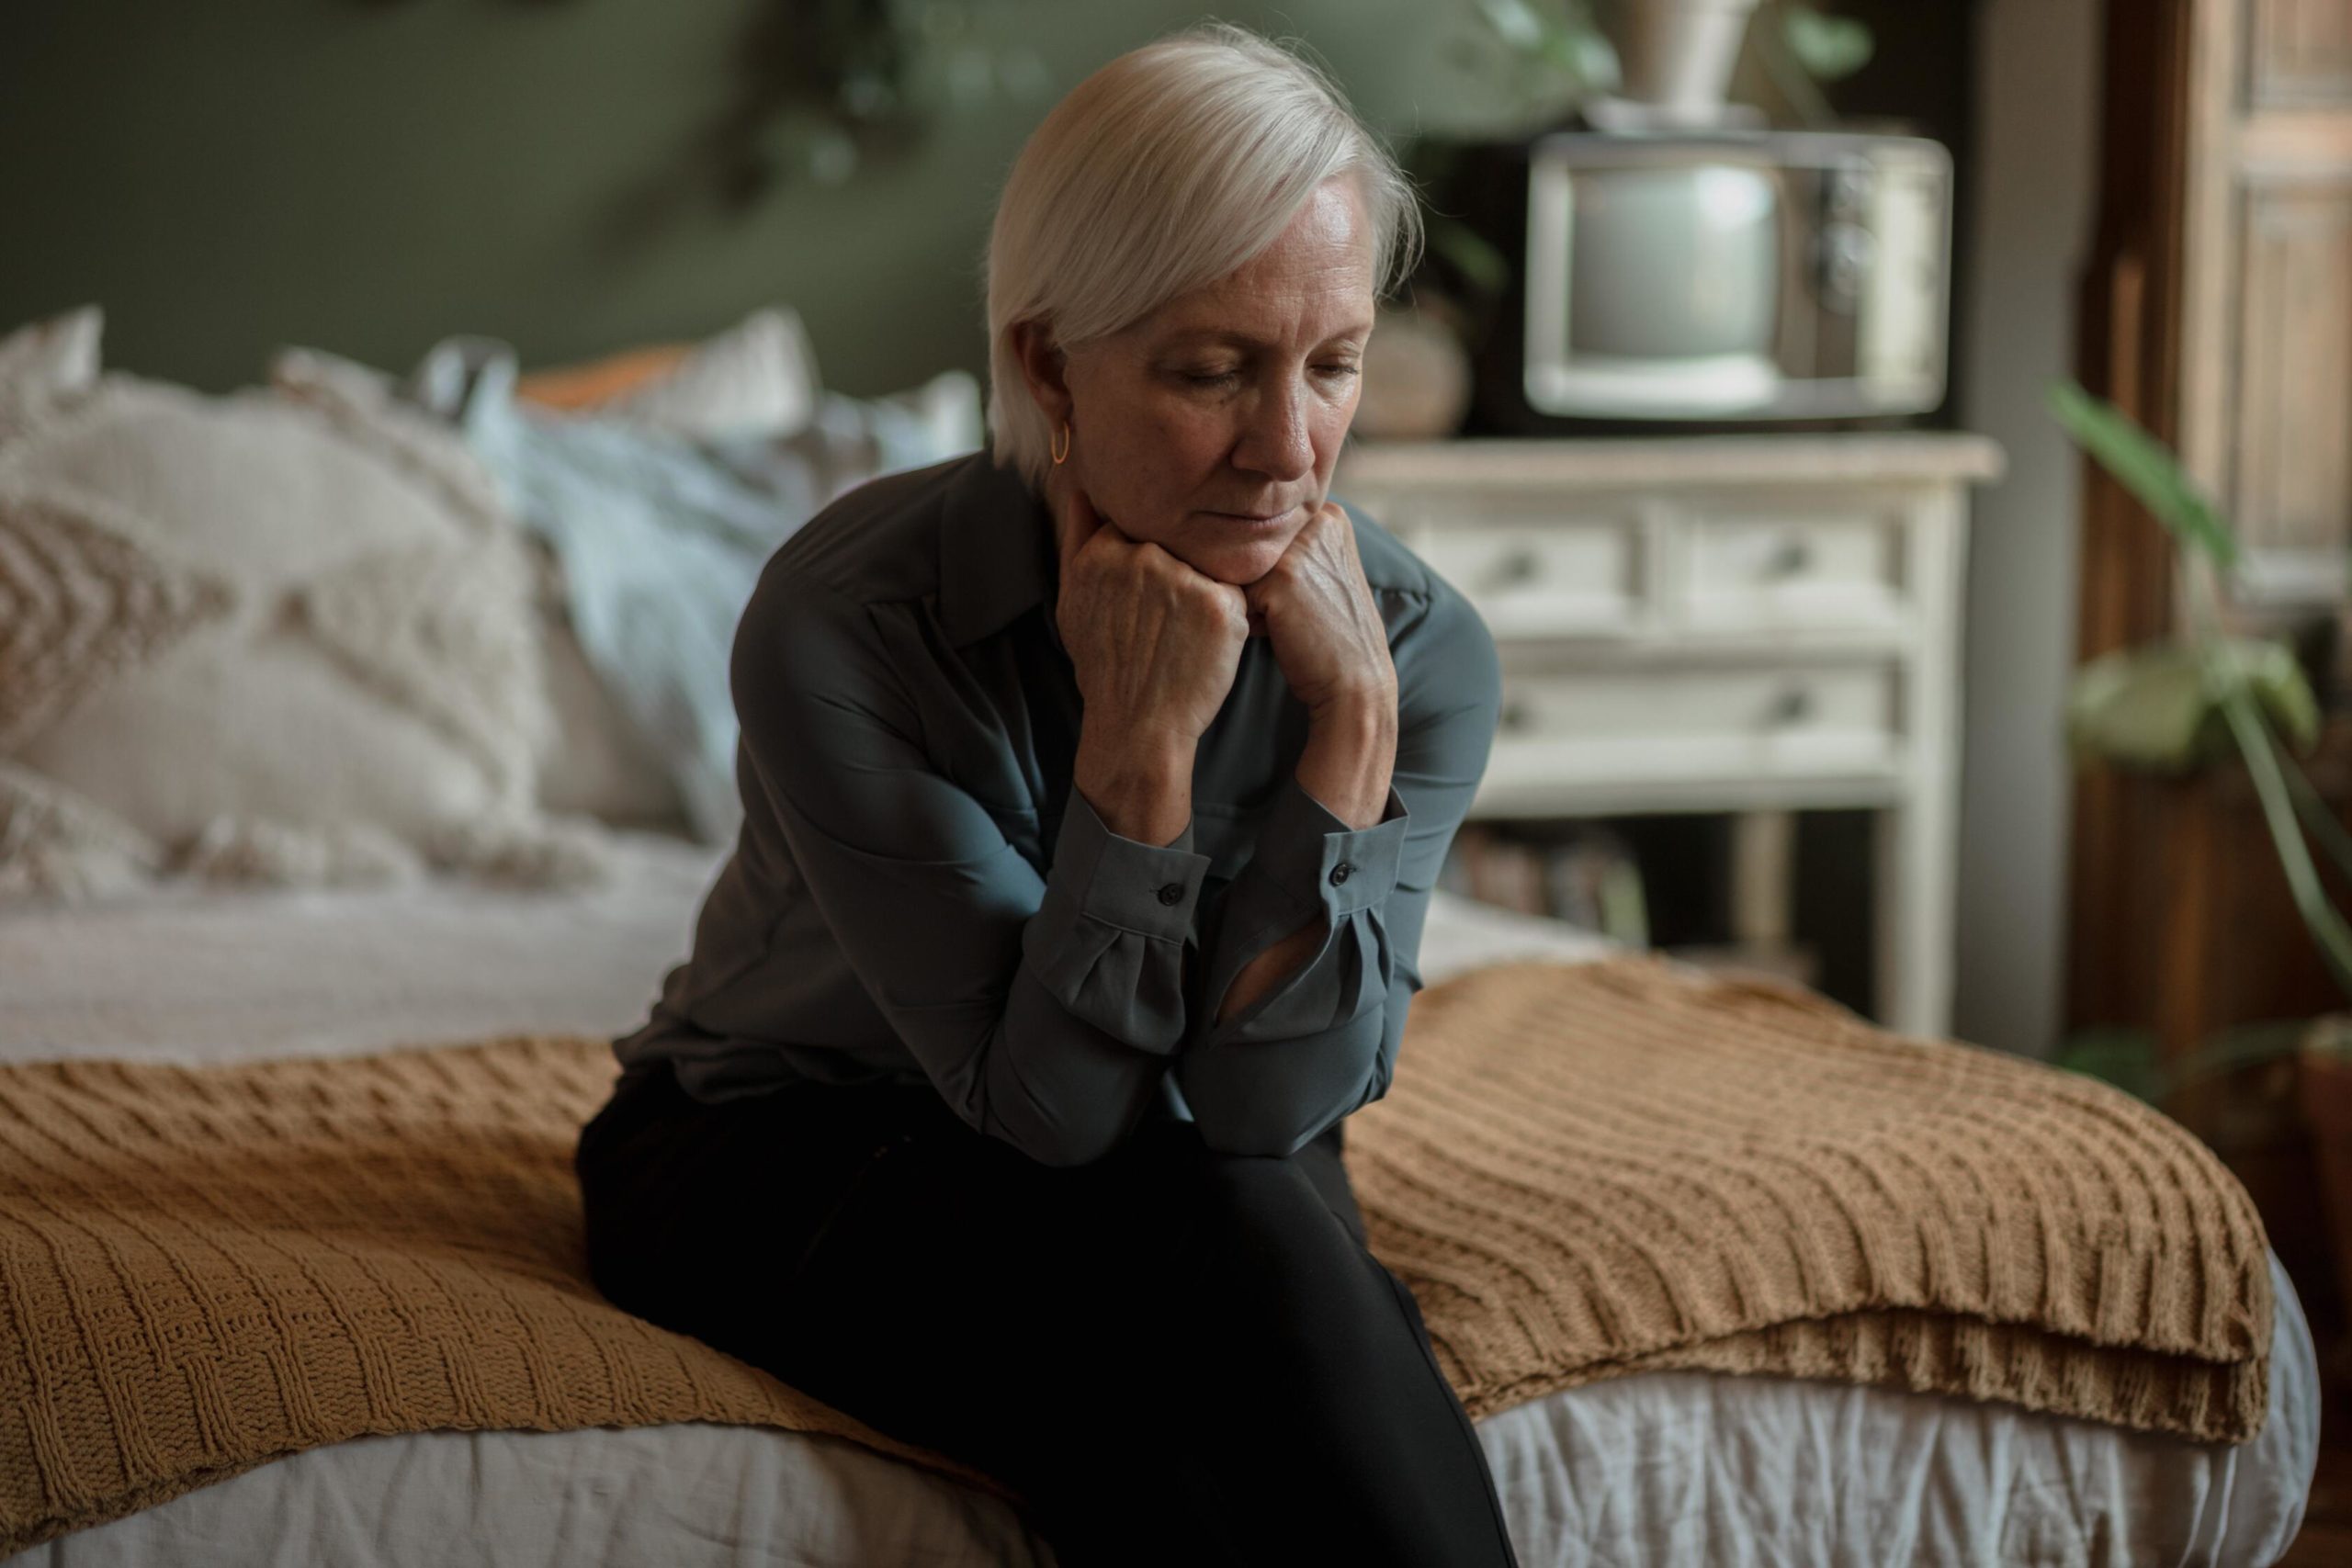 A senior woman sits on a bed alone.